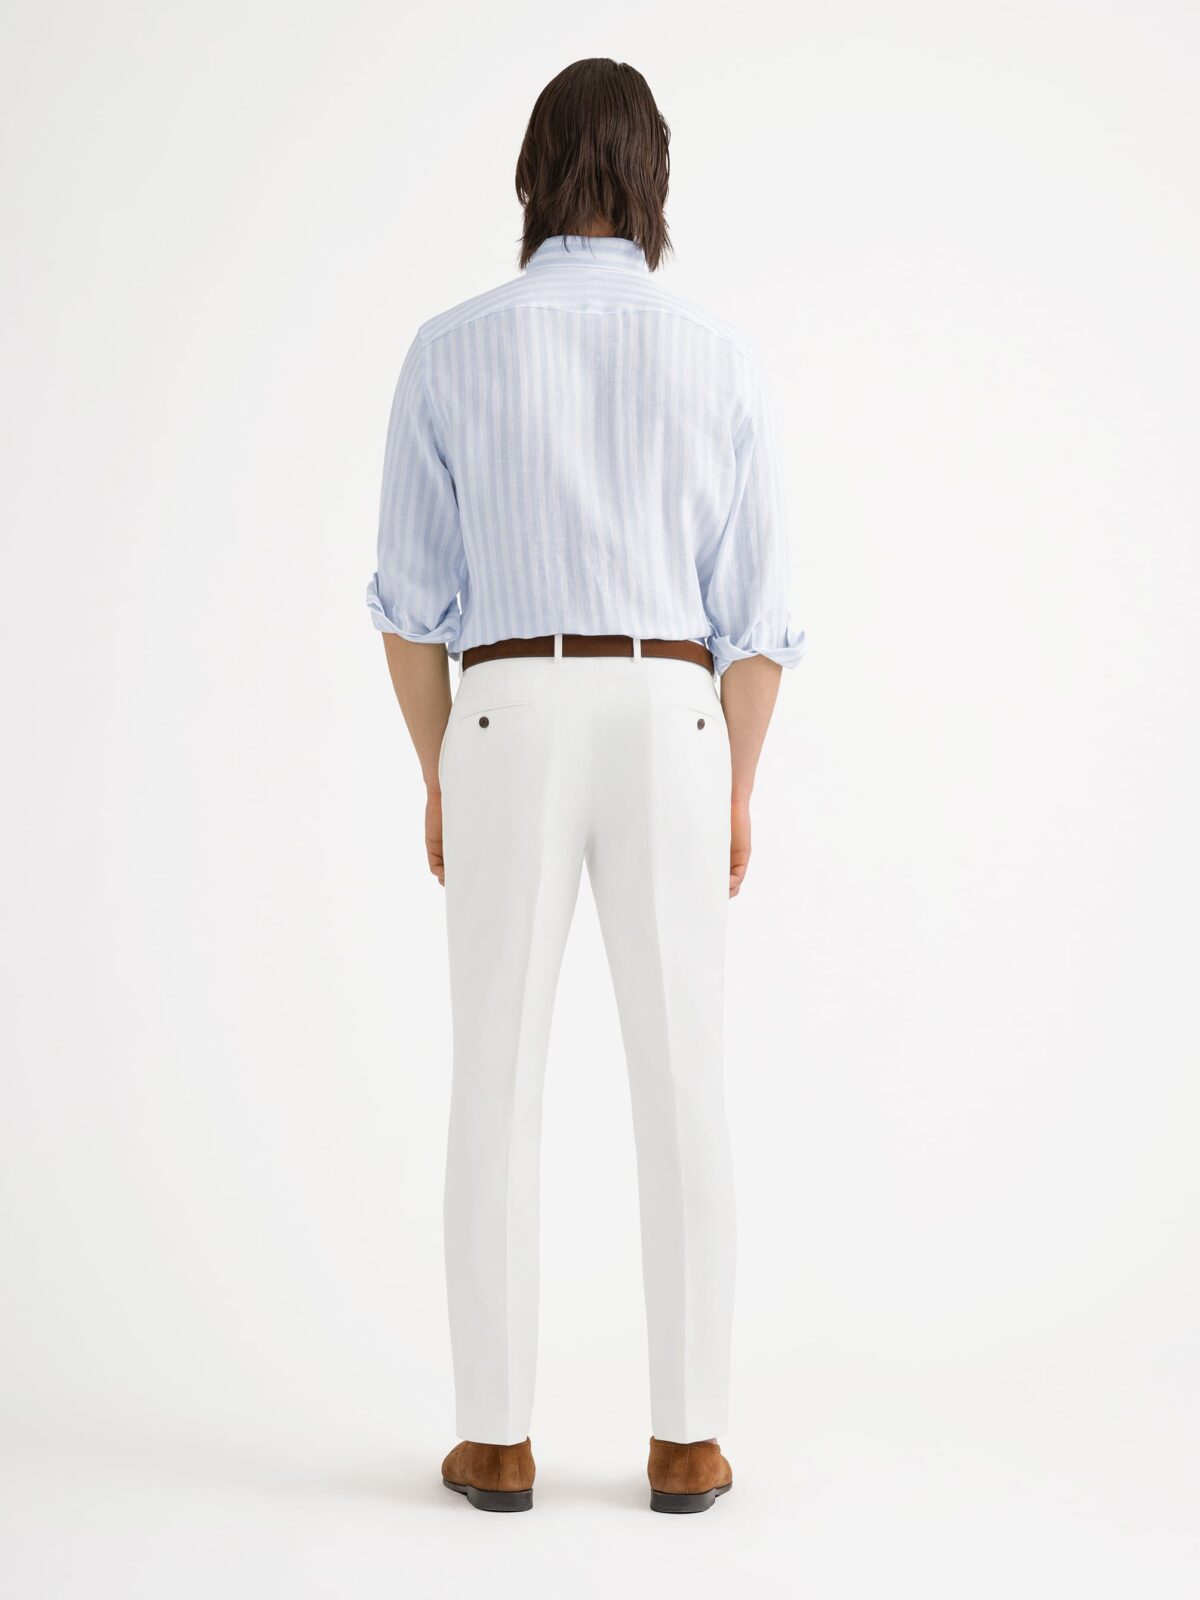 What shirt can I wear with white pants? - Quora